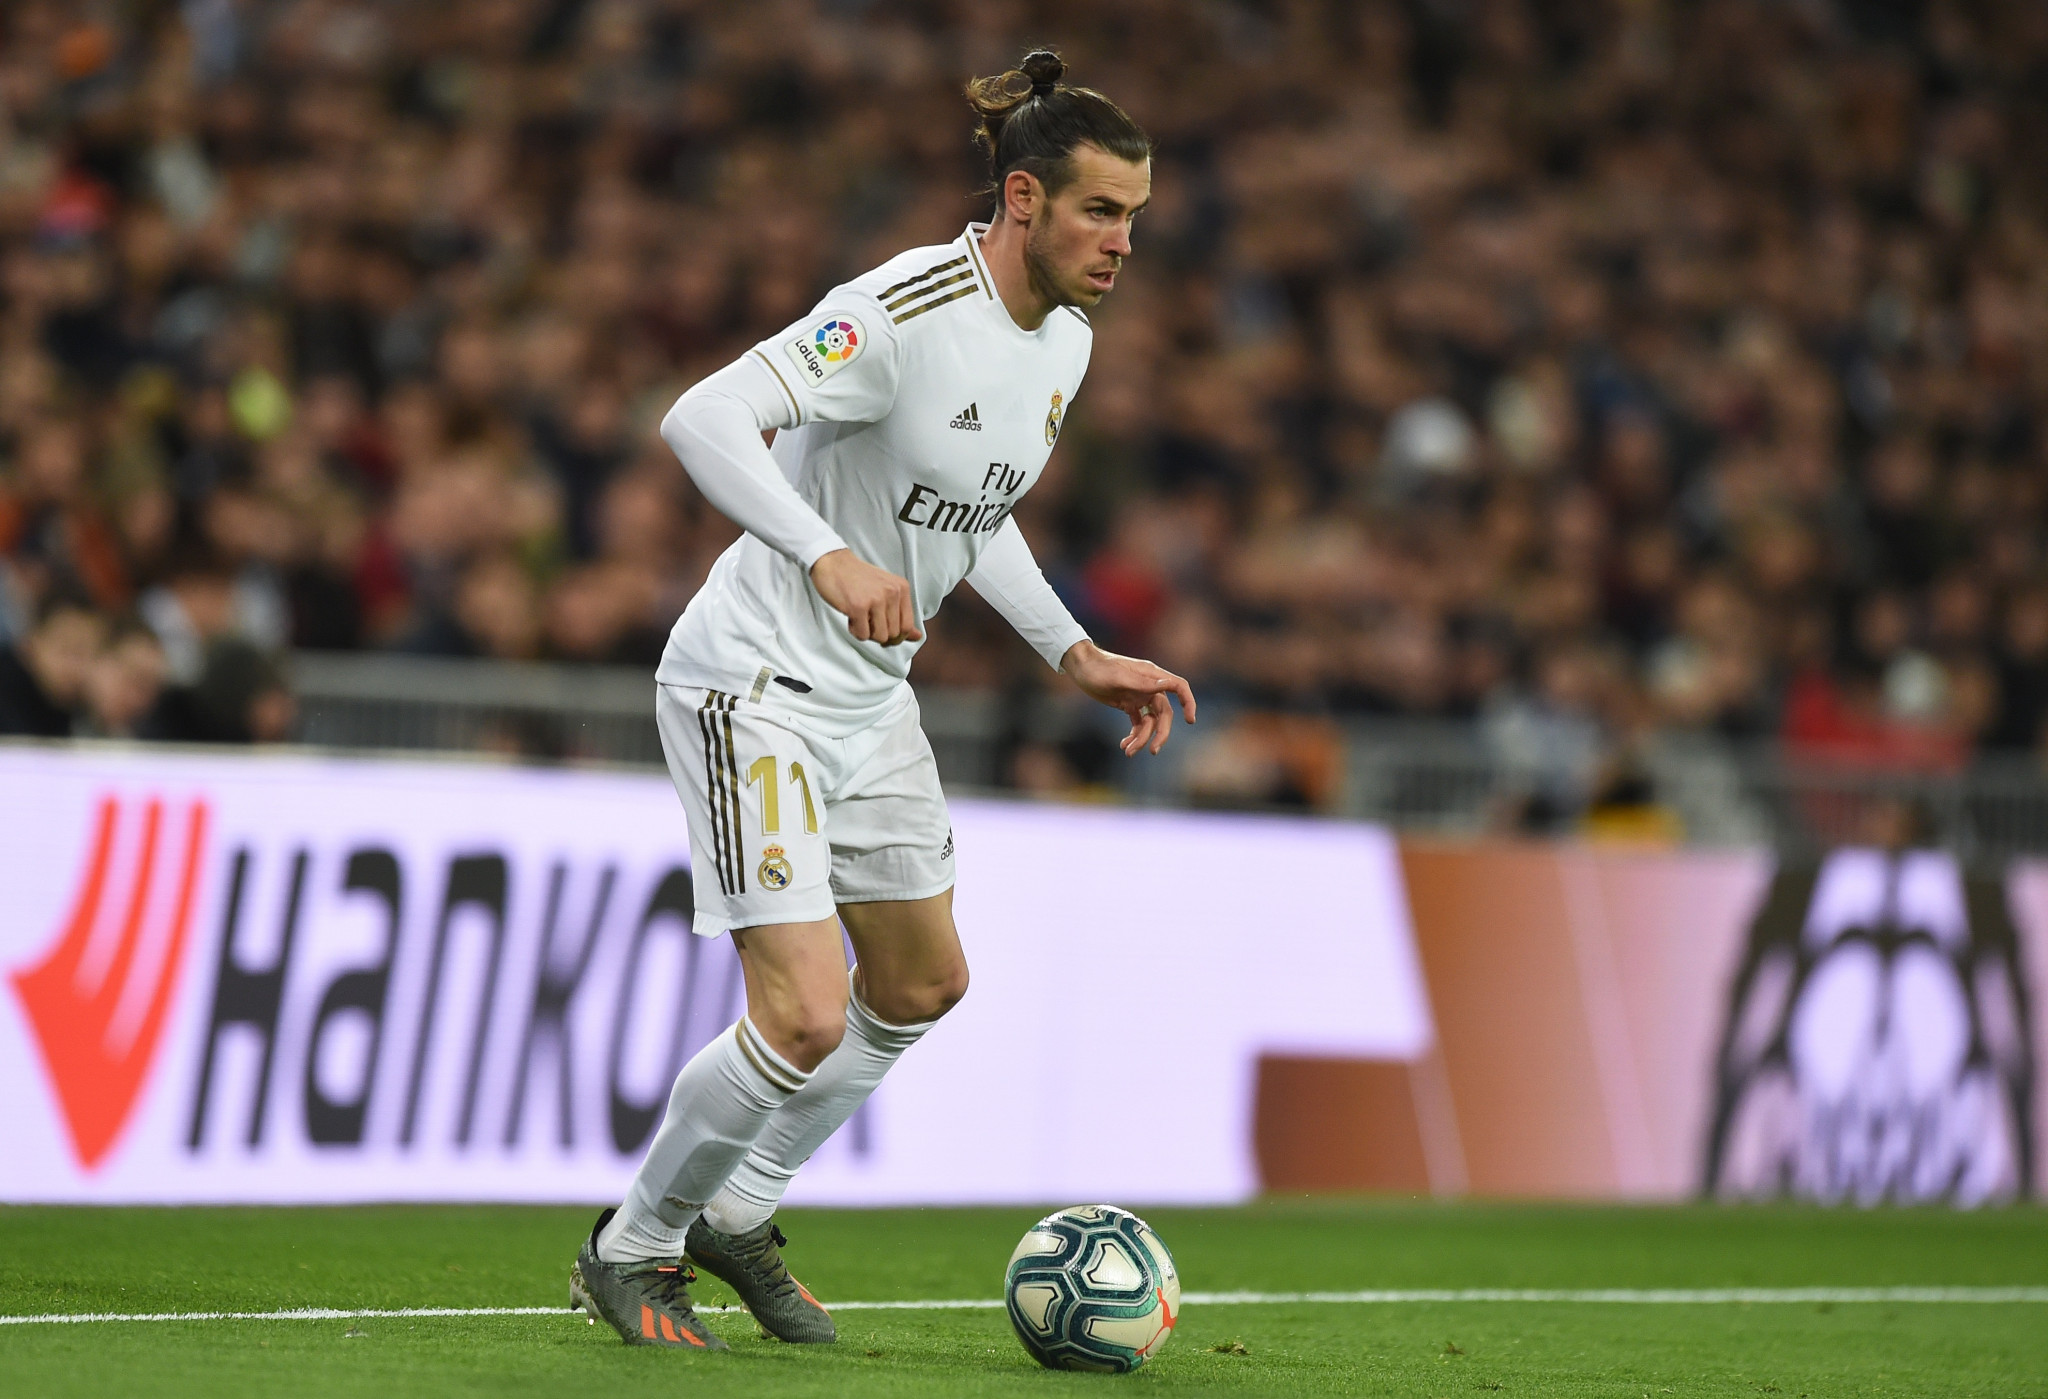 Gareth Bale is hoping to help raise funds for people affected by the coronavirus pandemic ©Getty Images